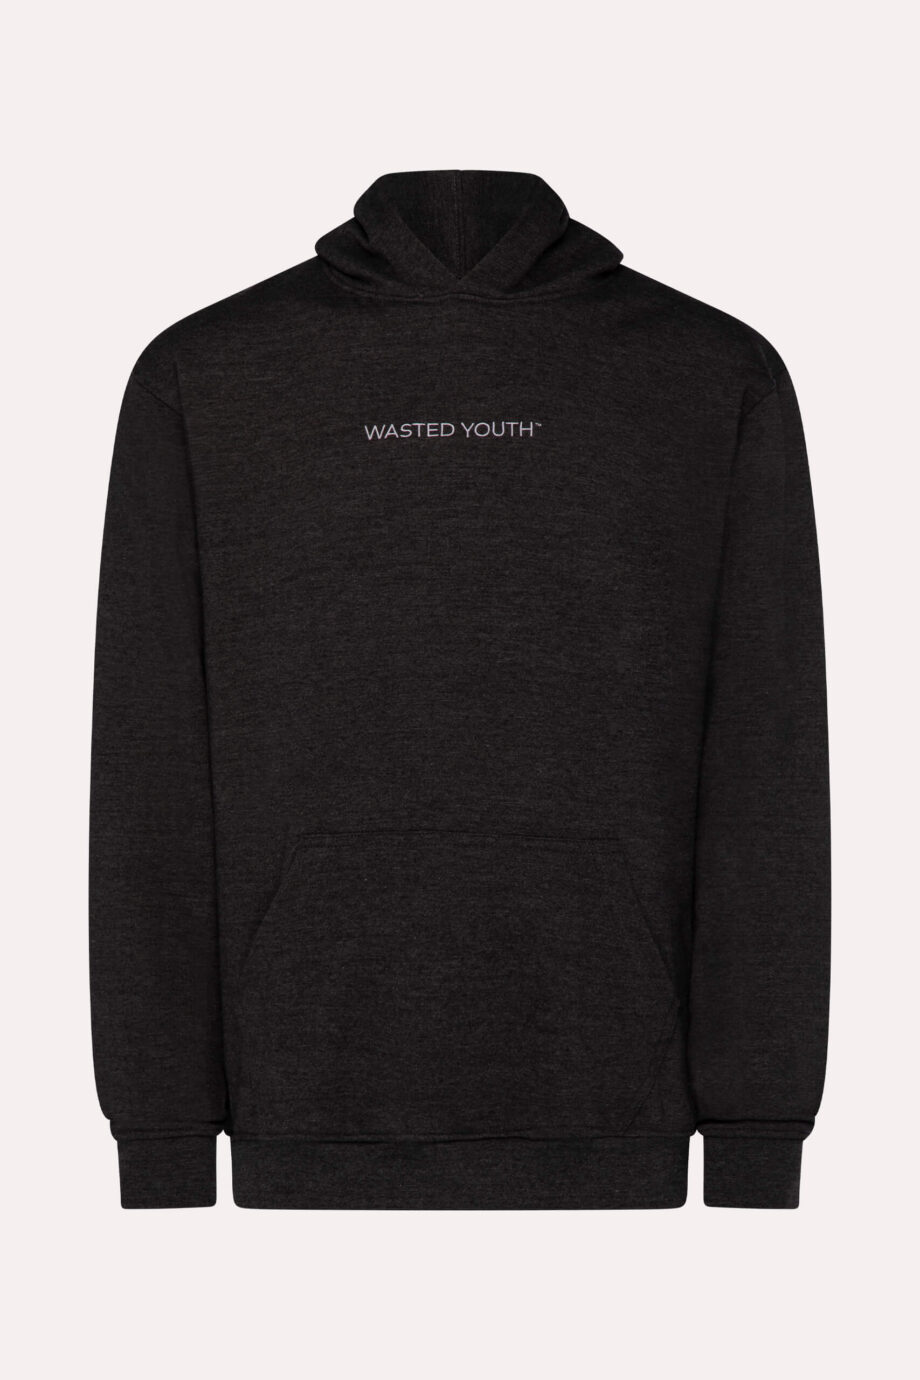 3L  Wasted Youth Hoodie #2 Gray パーカーvkdesign